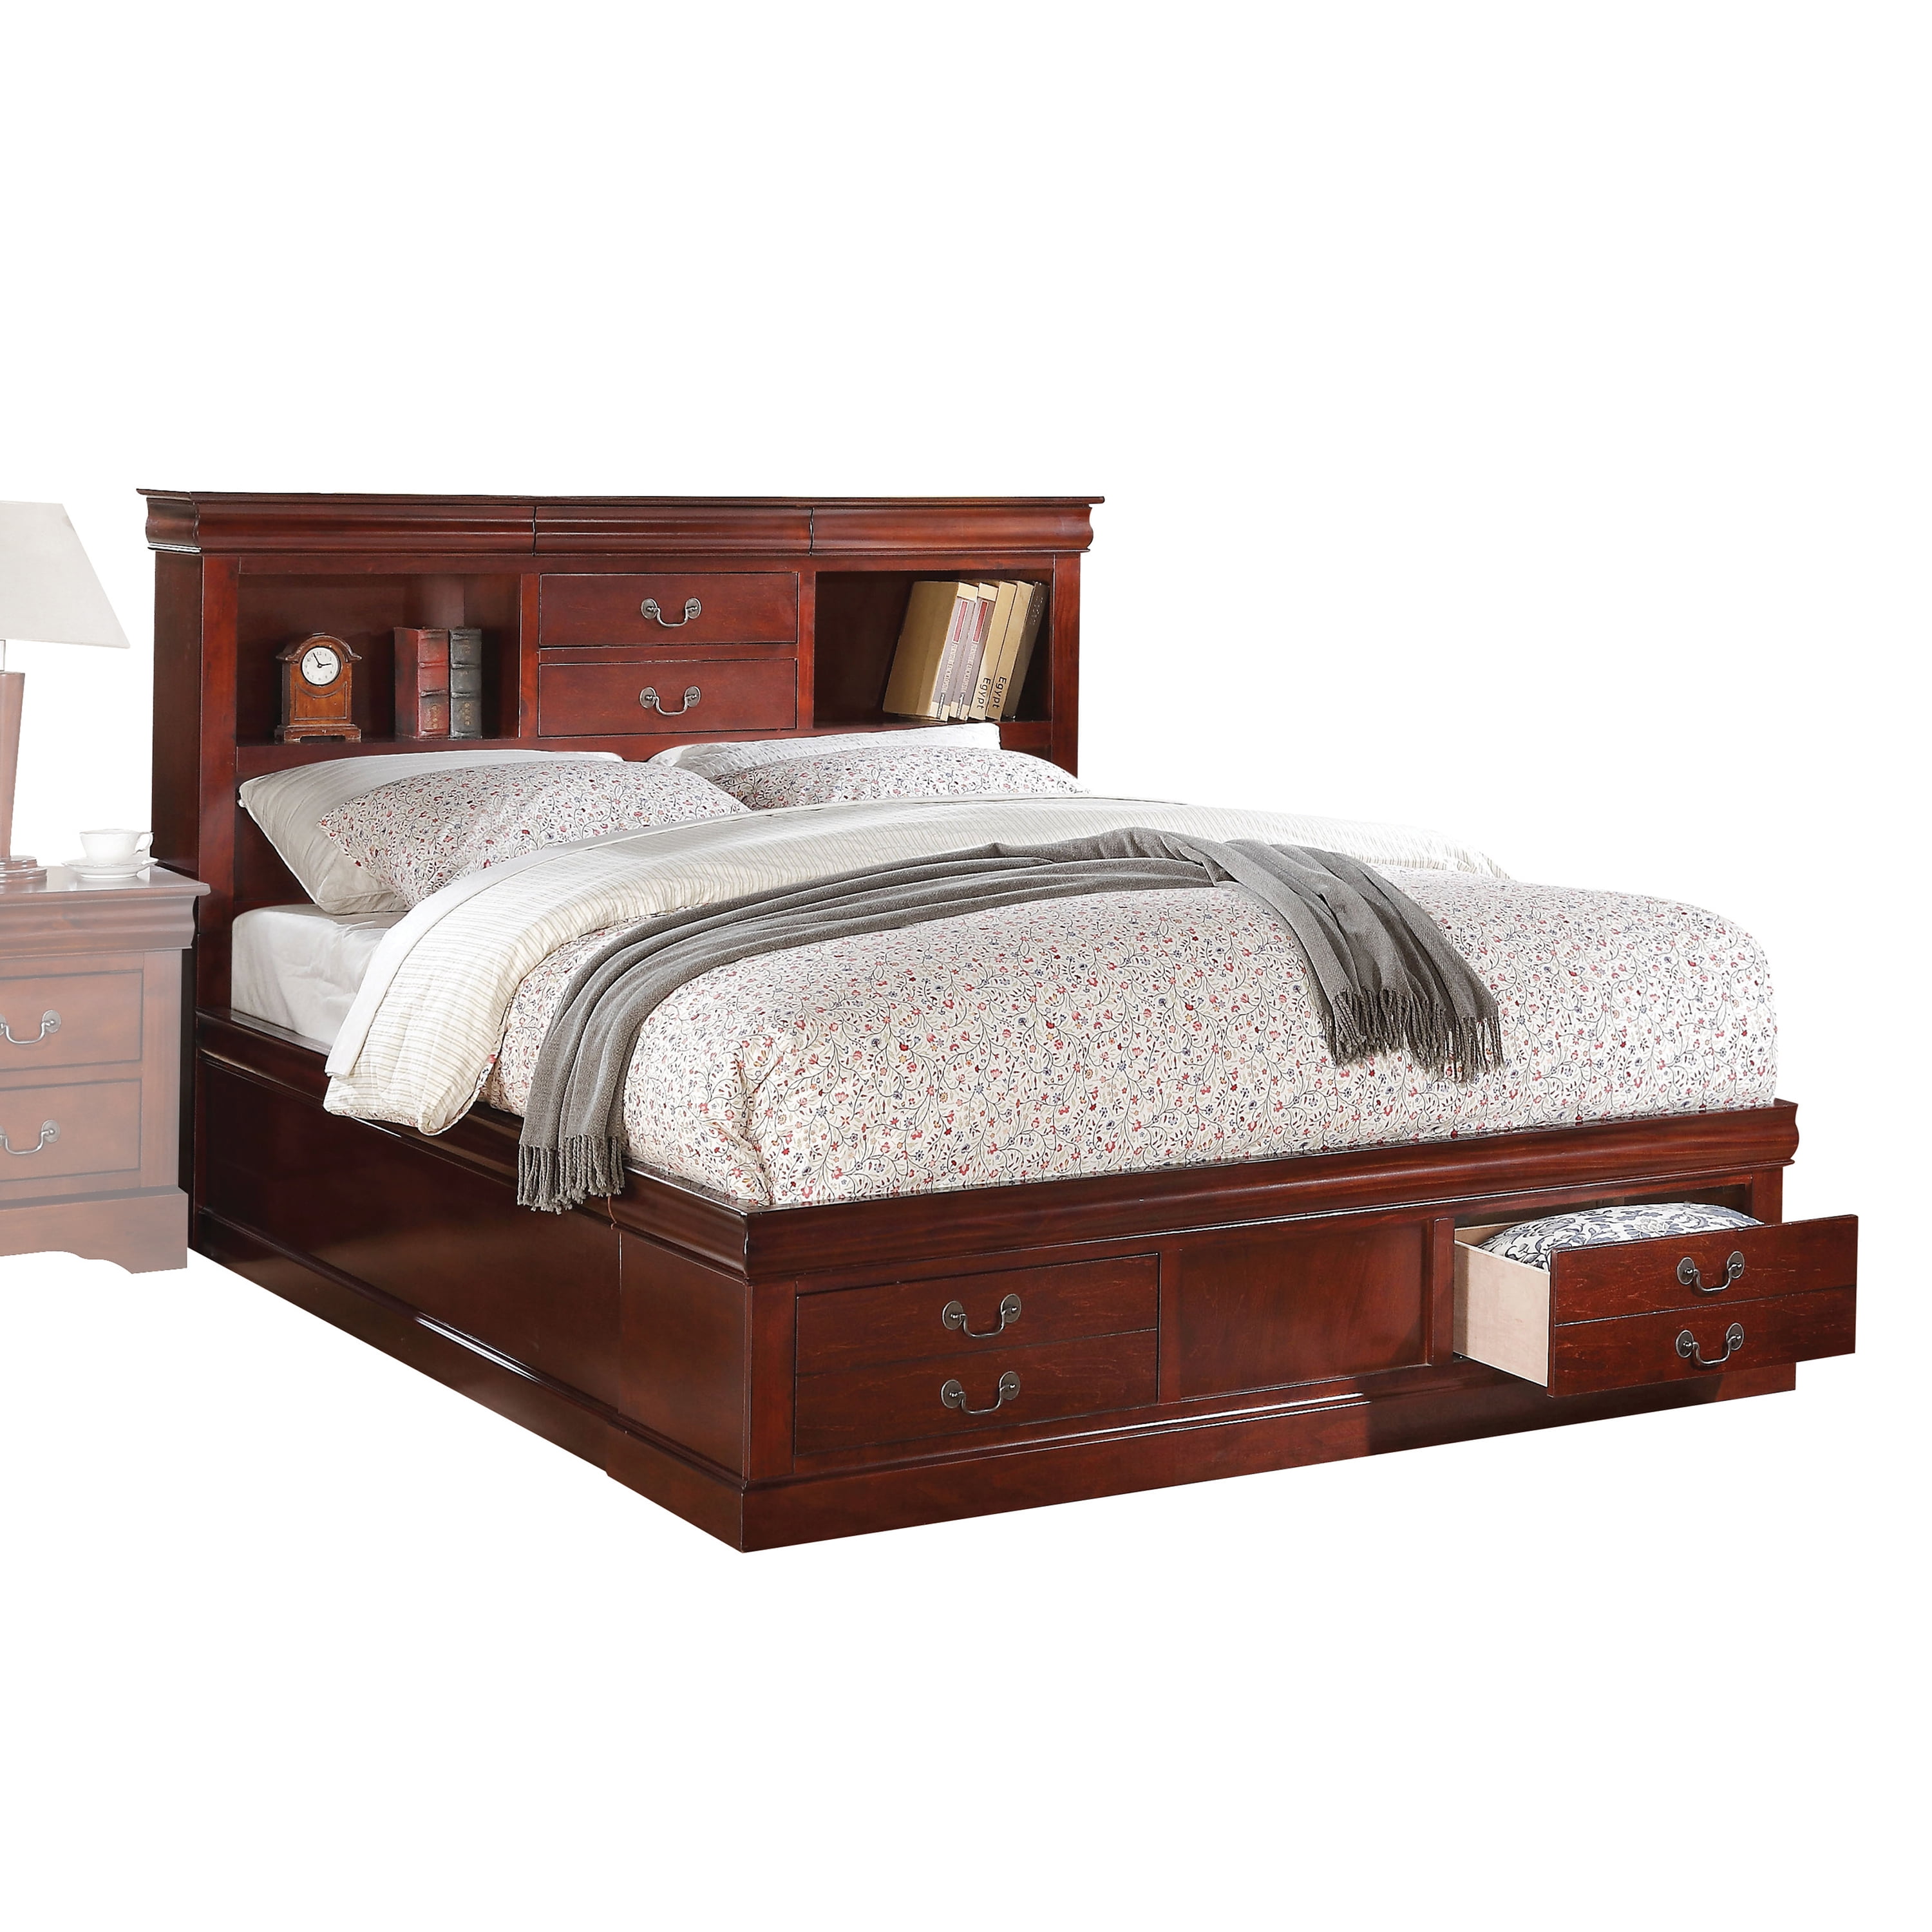 ACME Louis Philippe III Queen Bed with Storage in Cherry, Multiple Colors - www.bagssaleusa.com/louis-vuitton/ ...